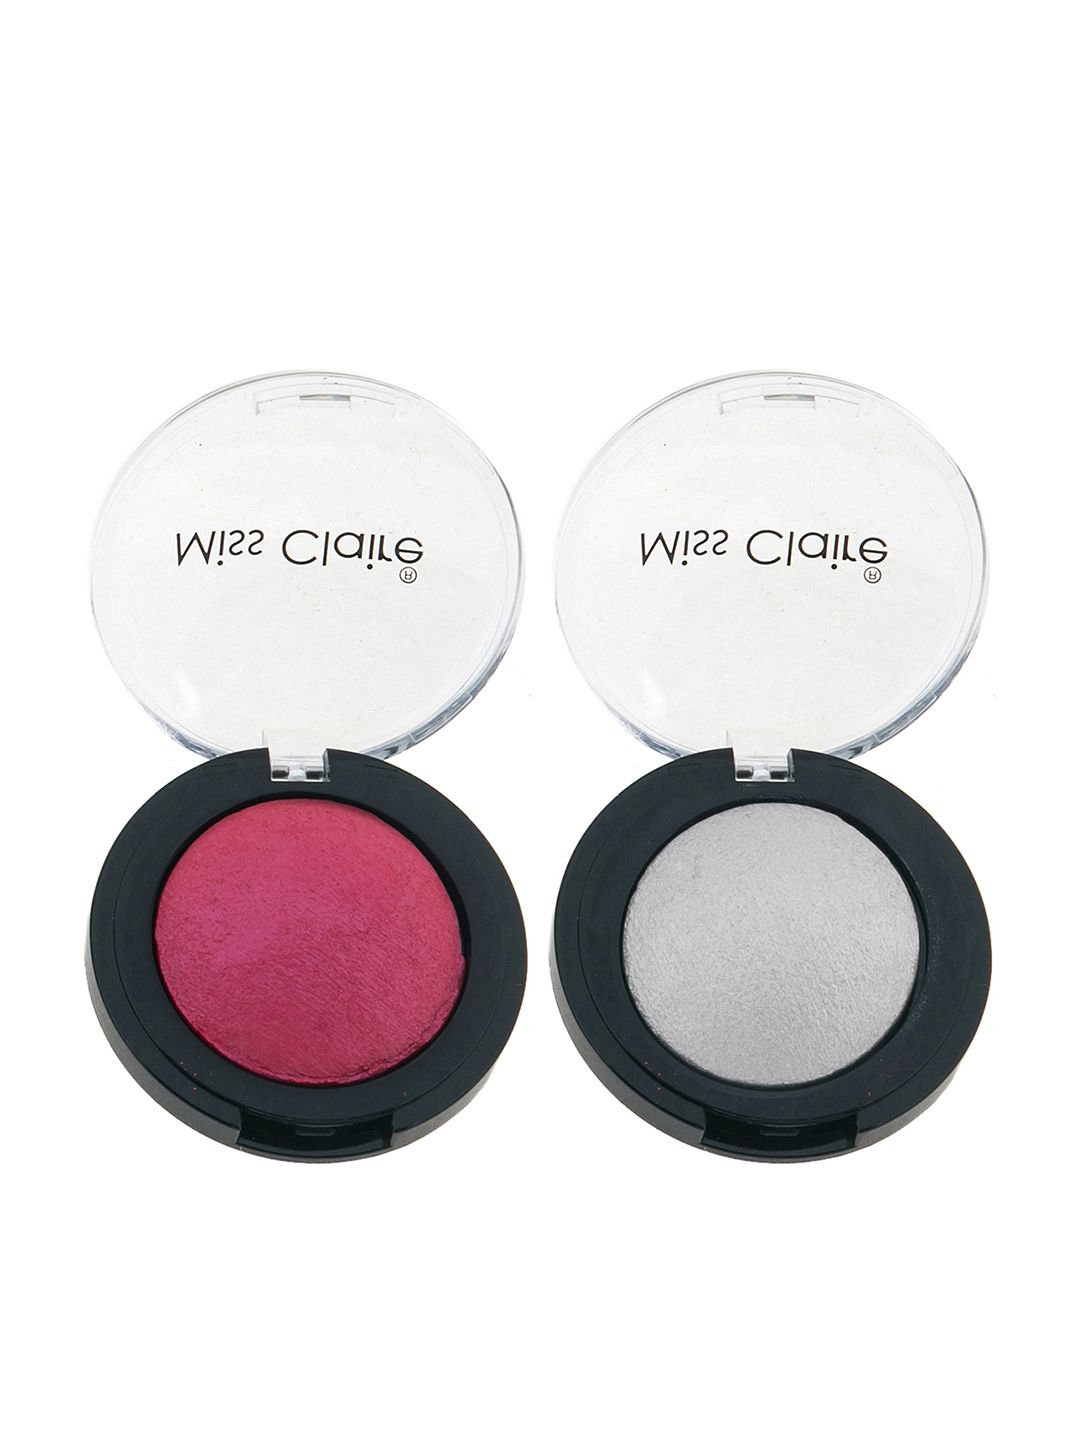 Miss Claire Set of 2 Eyeshadows Price in India